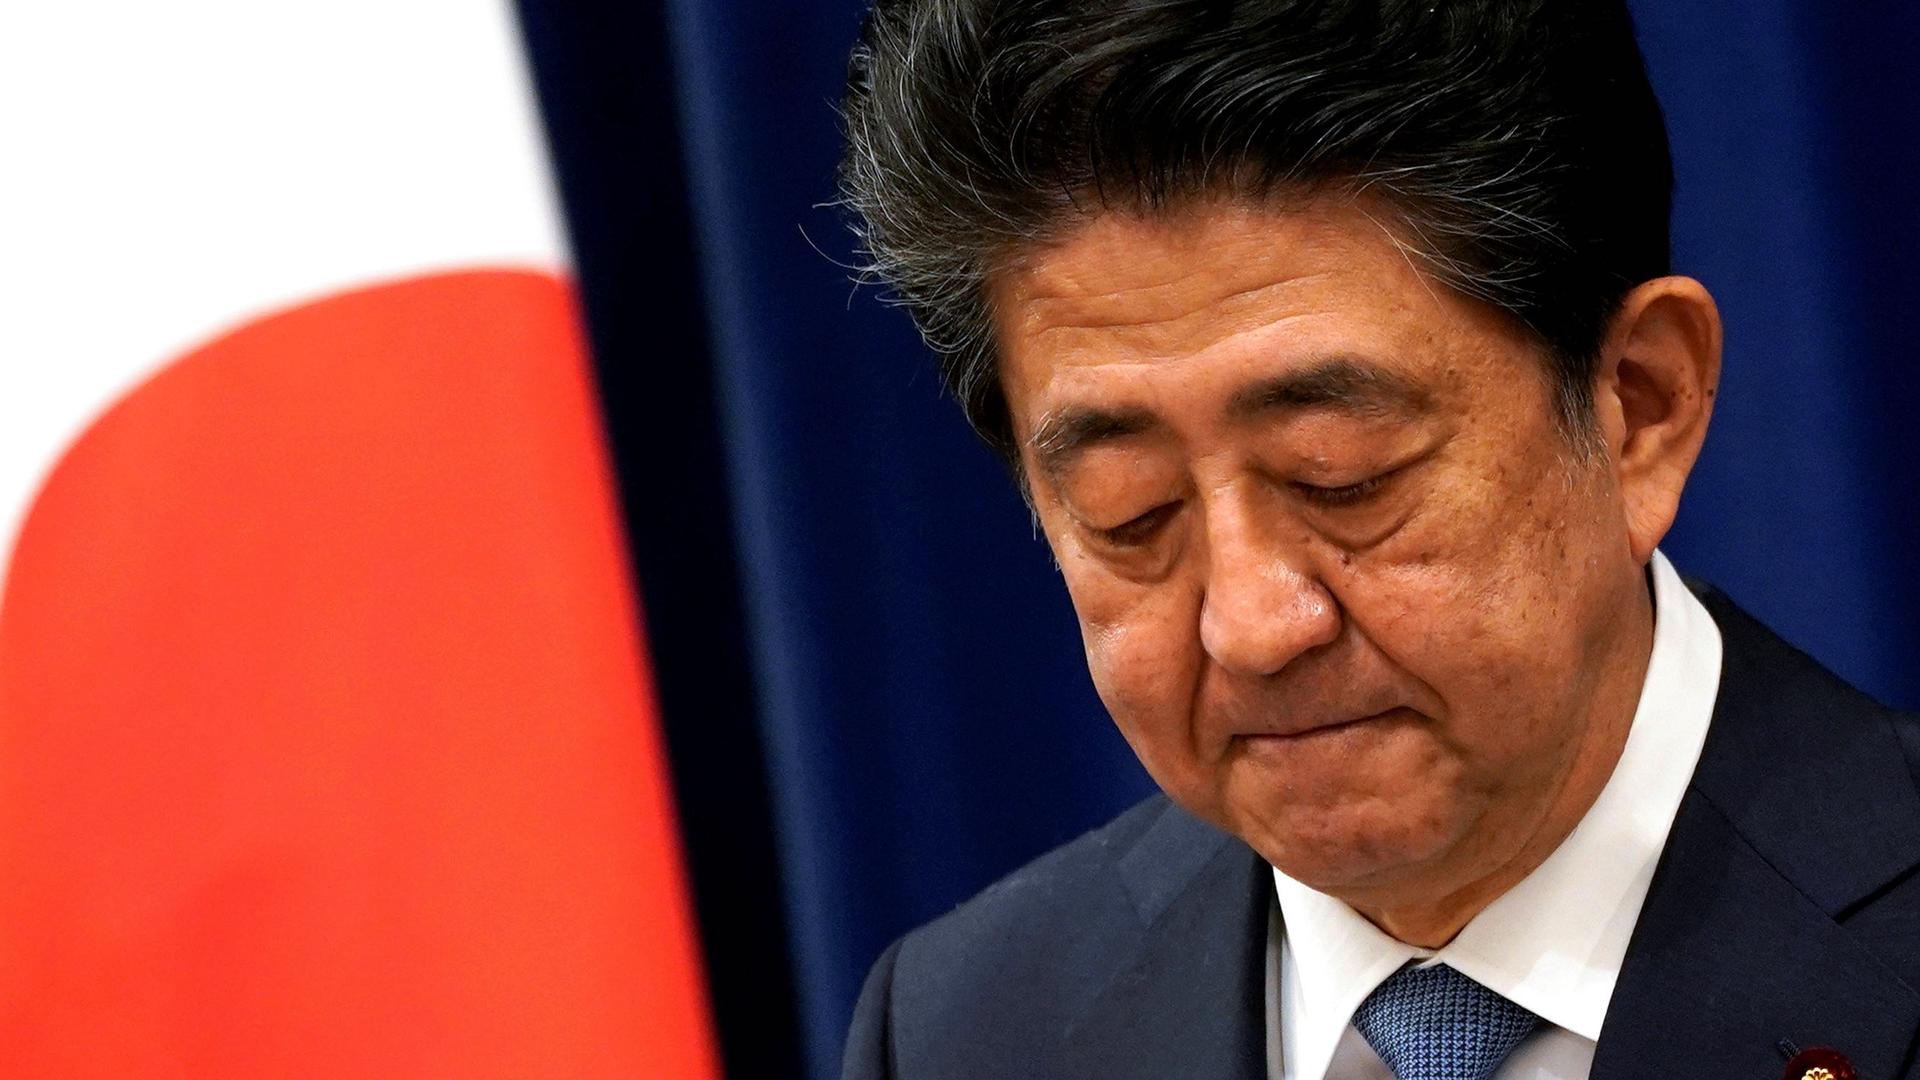 Japanese Prime Minister Shinzō Abe reacts during a news conference at the prime minister's official residence in Tokyo, Aug. 28, 2020.